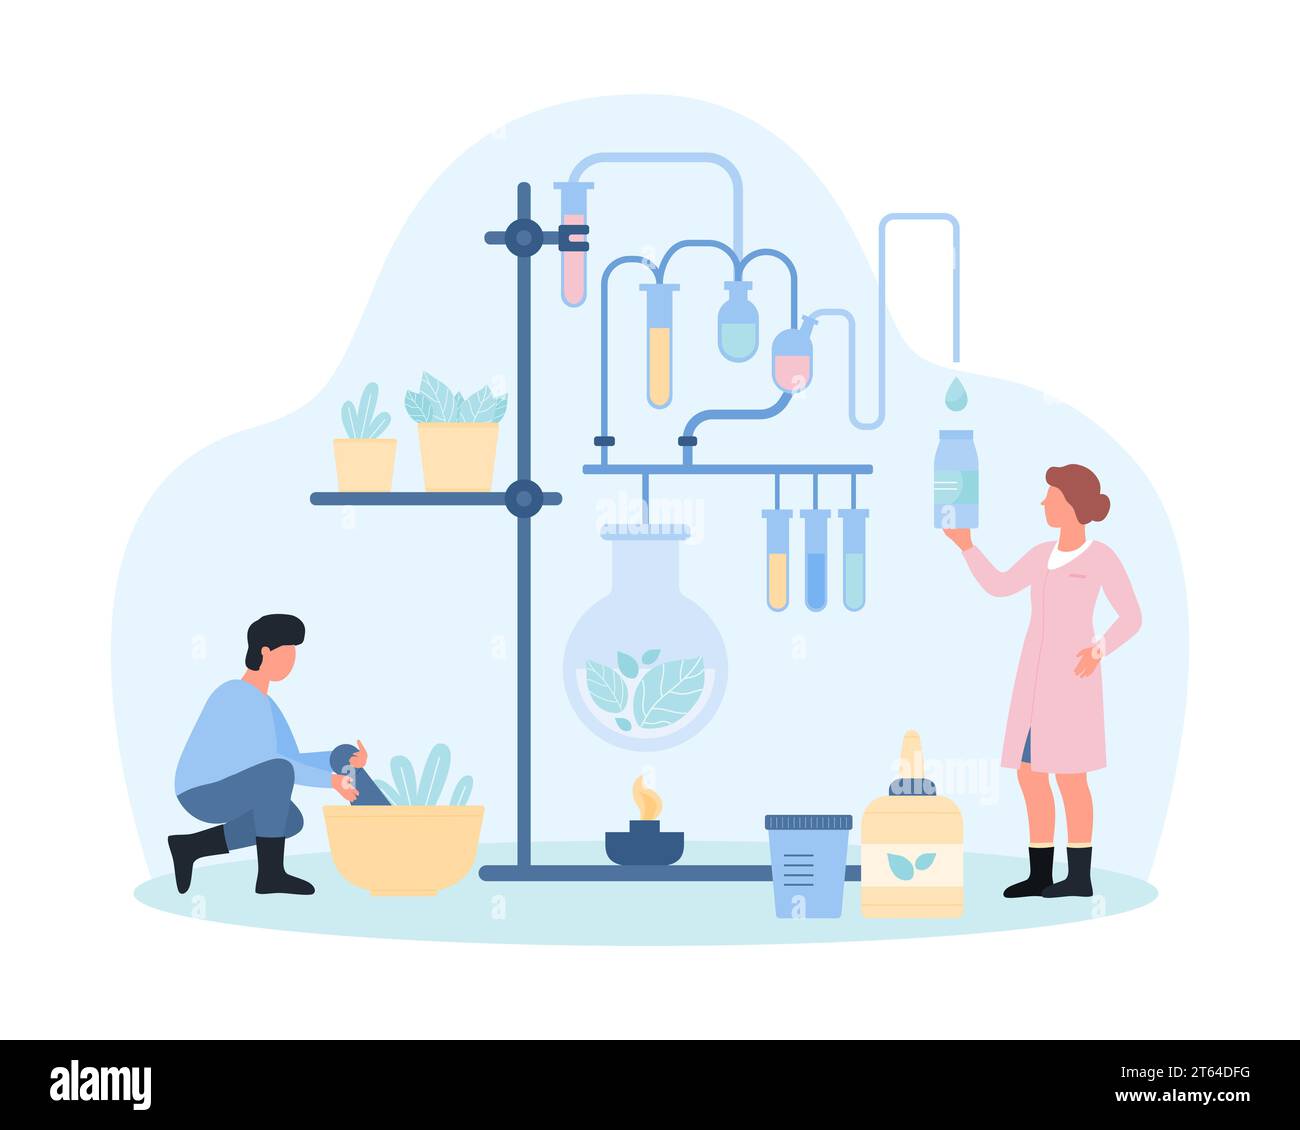 Naturopathy, alternative and complementary supplement therapy vector illustration. Cartoon tiny people use natural herbs and plants, pestle and mortar, laboratory equipment to make naturopathic remedy Stock Vector